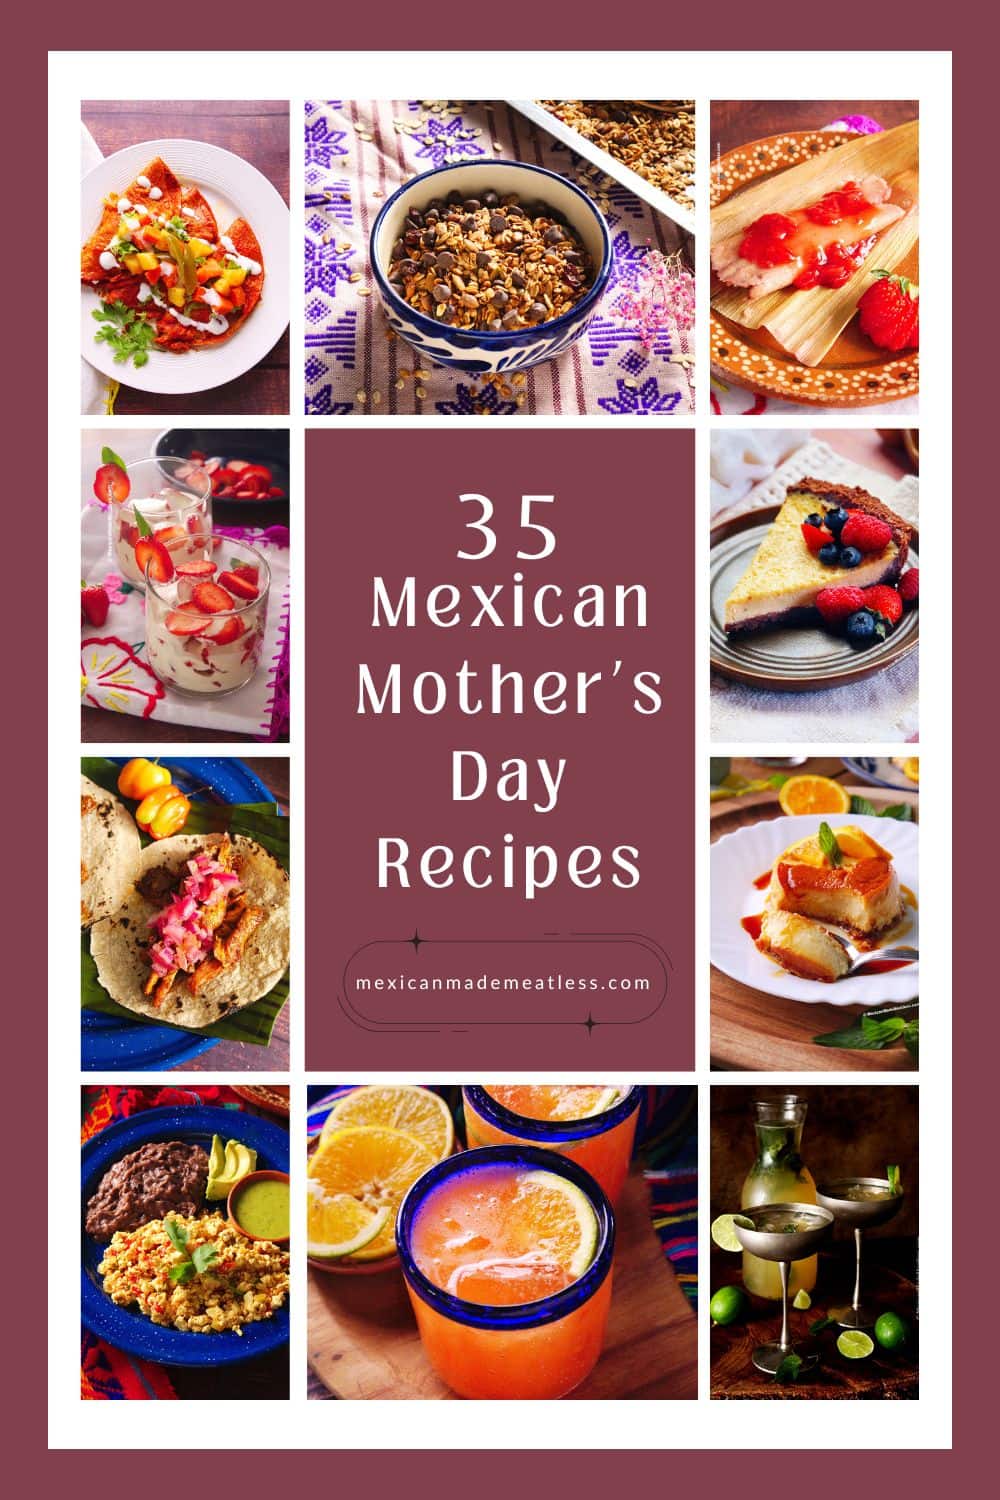 A collage showing different Mexican recipes perfect for Mother's Day.